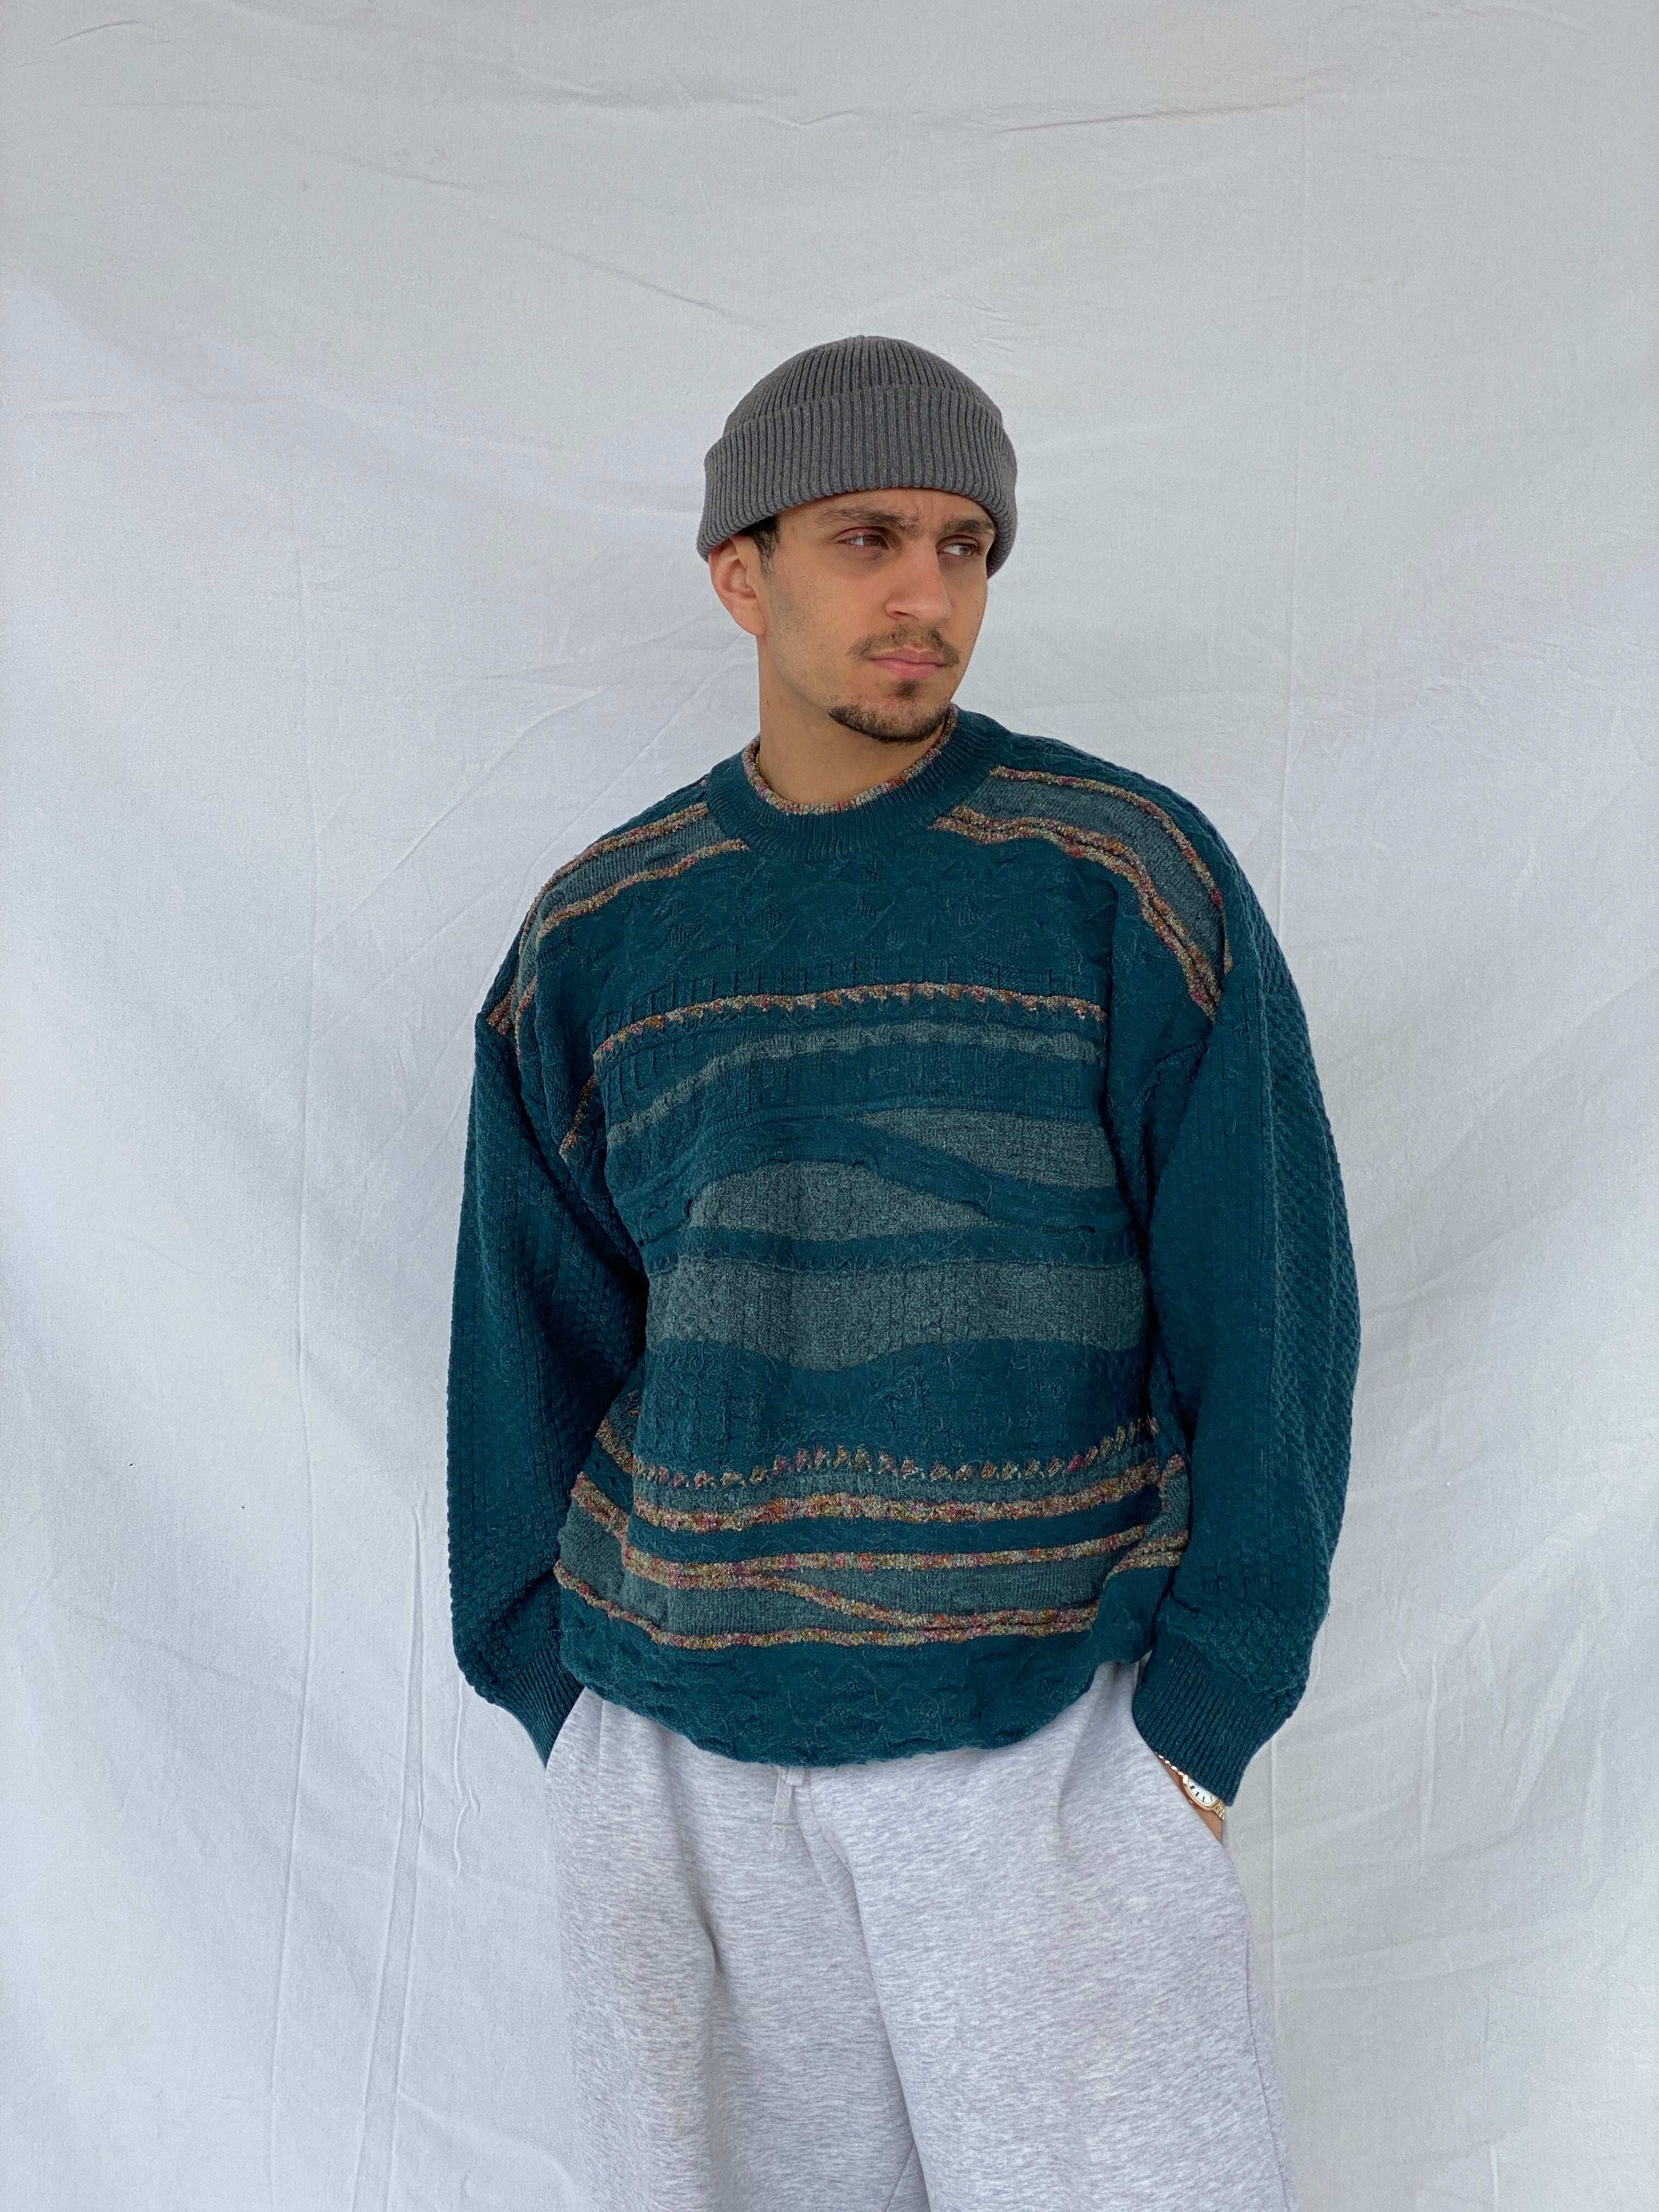 Vintage Orient Green Knitted Sweater - Size M/L - Balagan Vintage Sweater 80s, 90s, Abdullah, knitted sweater, vintage sweater